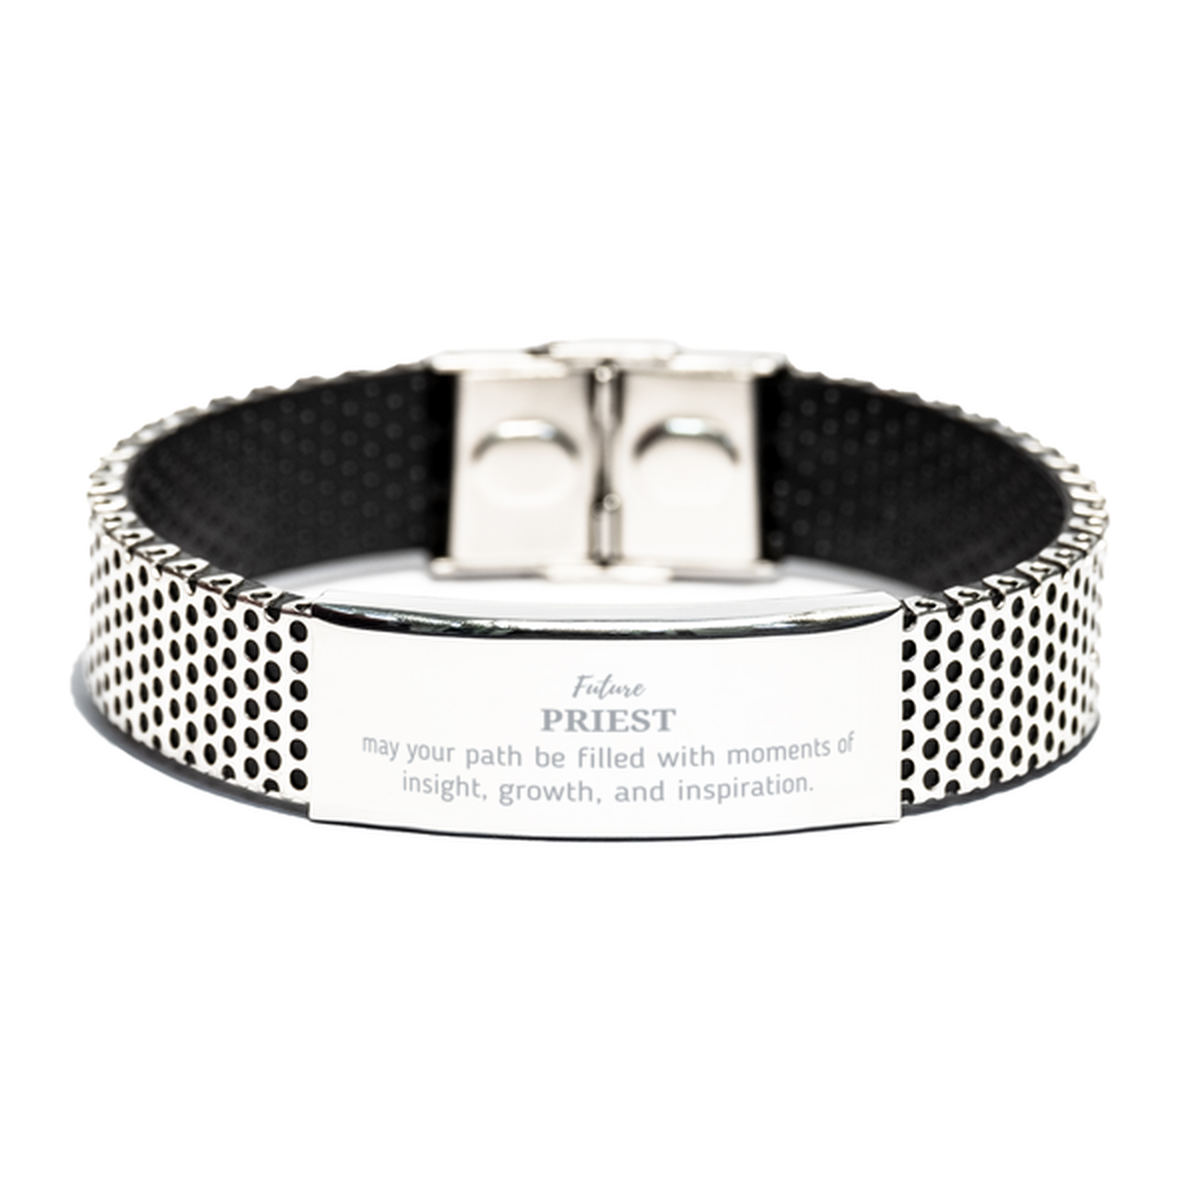 Future Priest Gifts, May your path be filled with moments of insight, Graduation Gifts for New Priest, Christmas Unique Stainless Steel Bracelet For Men, Women, Friends